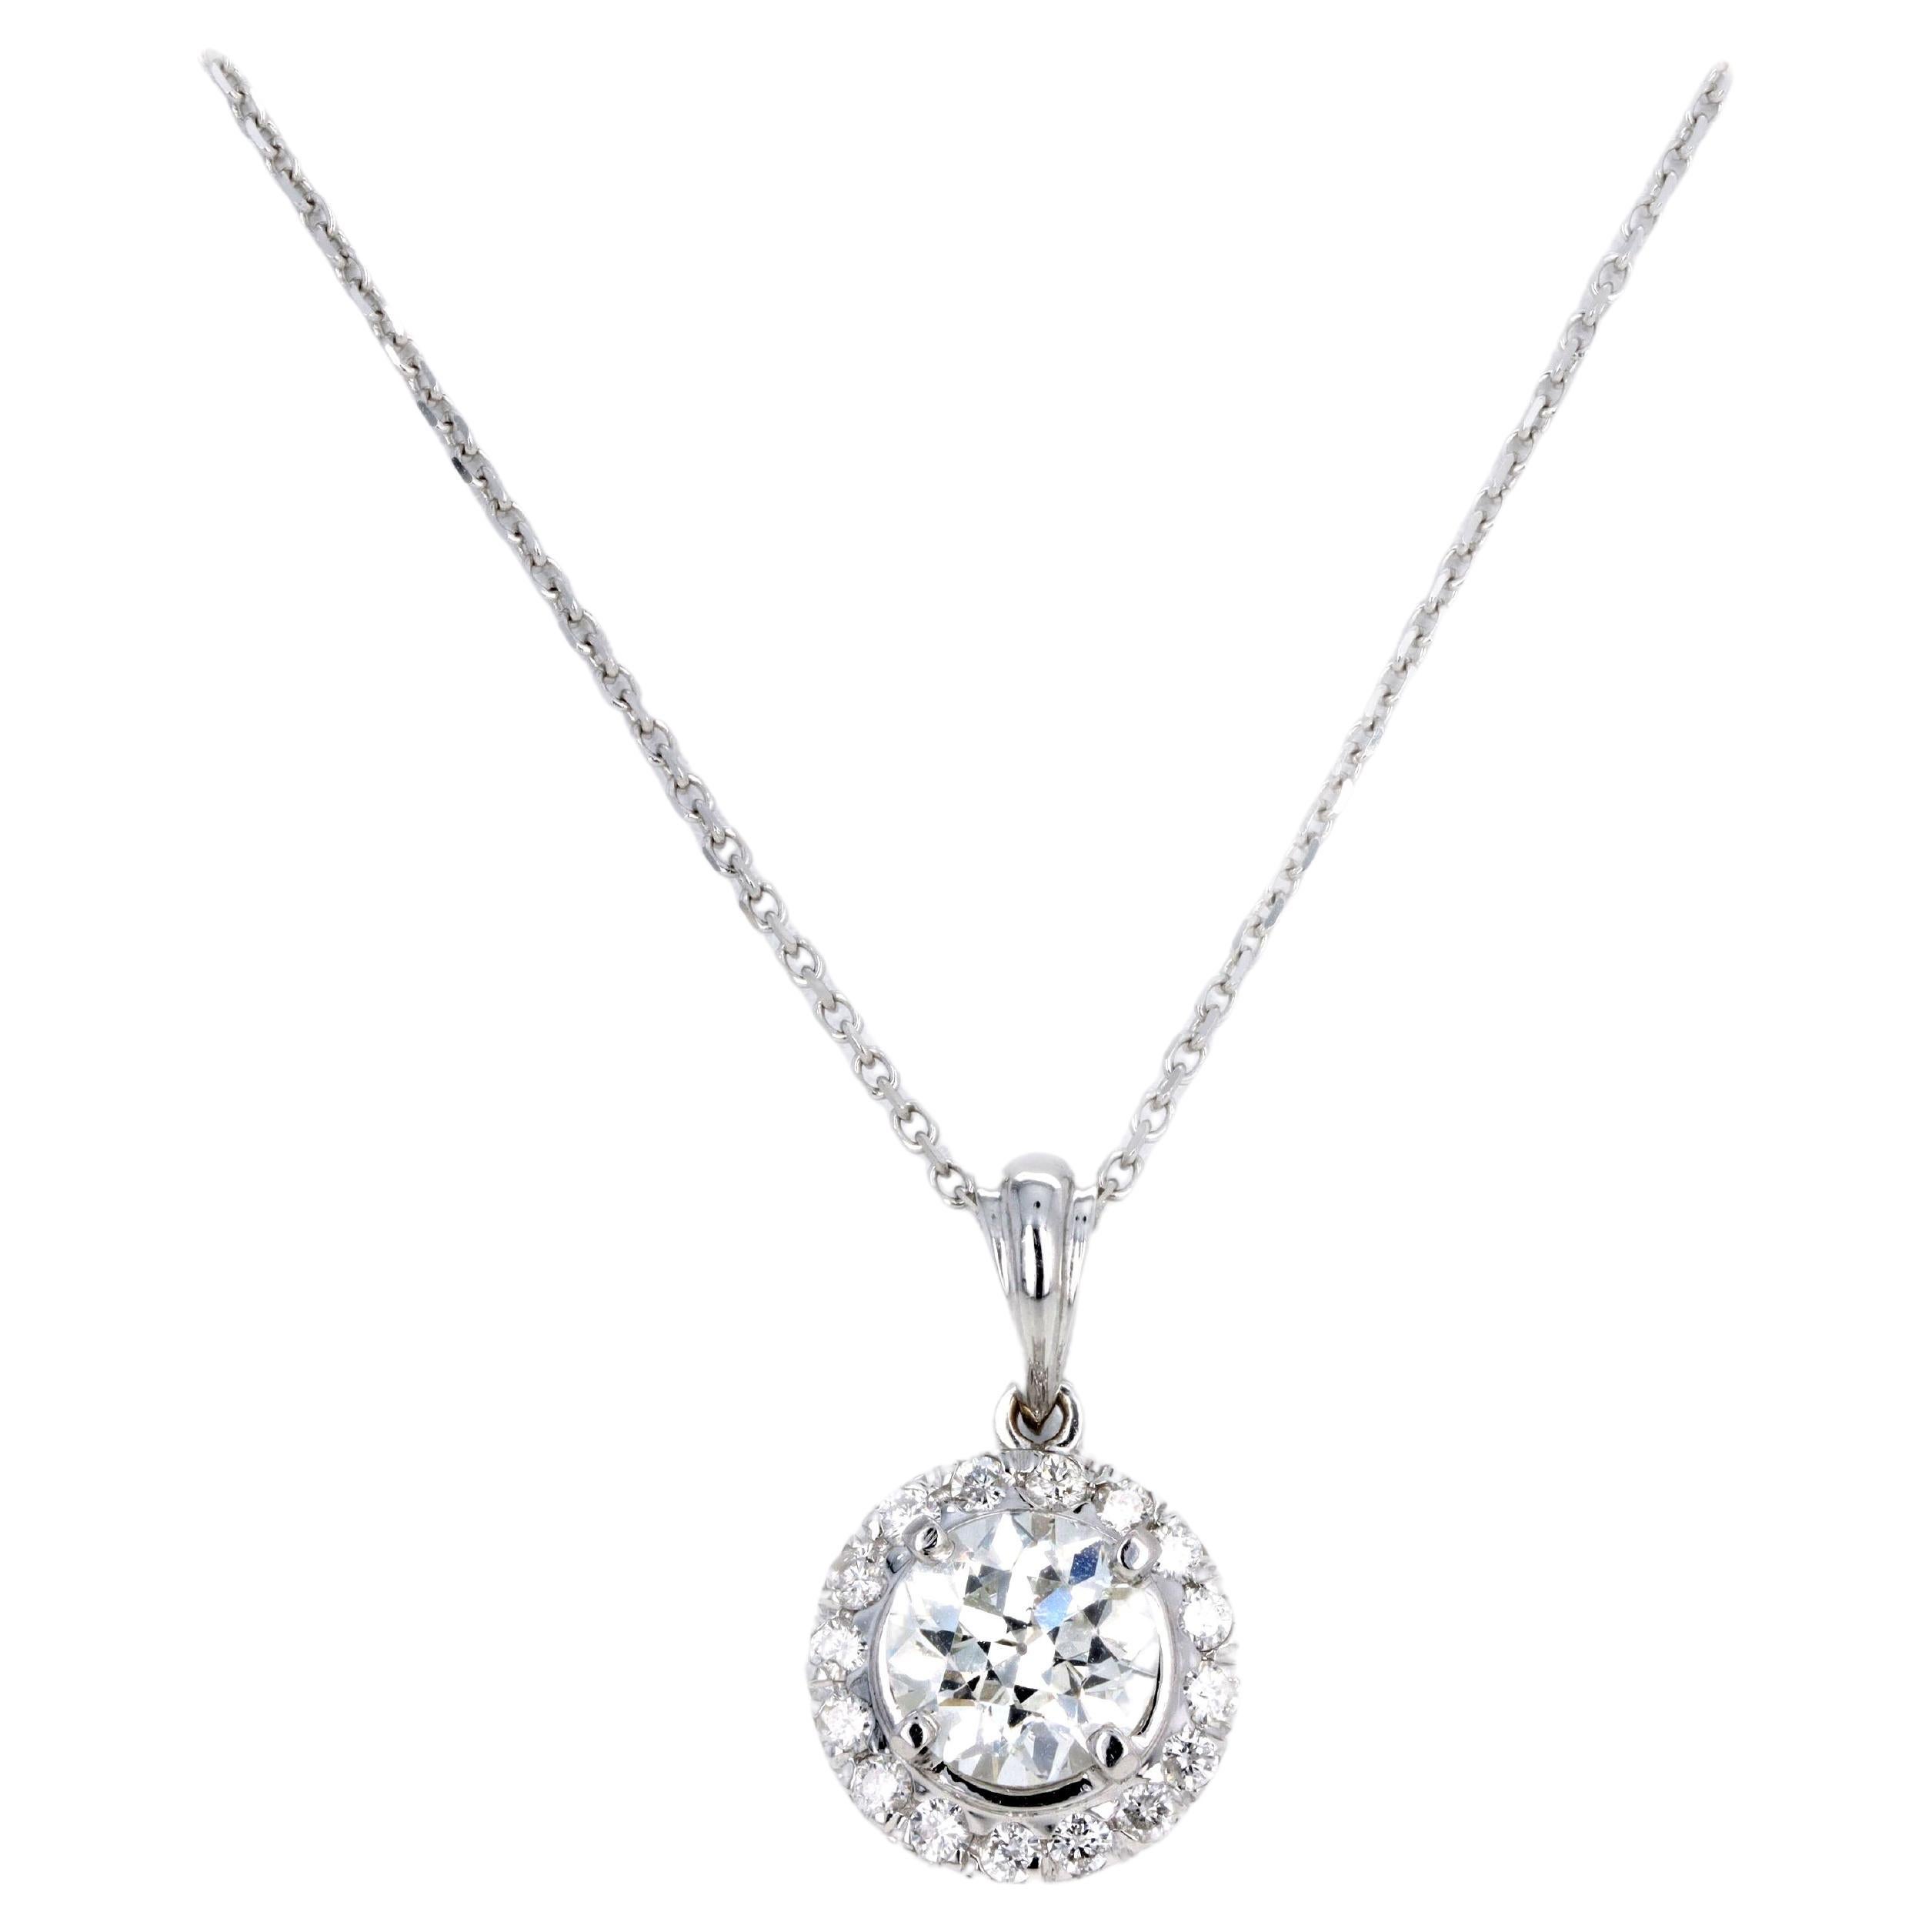 1.10 Carat Old European Diamond Halo Pendant Necklace in 18K White Gold For Sale